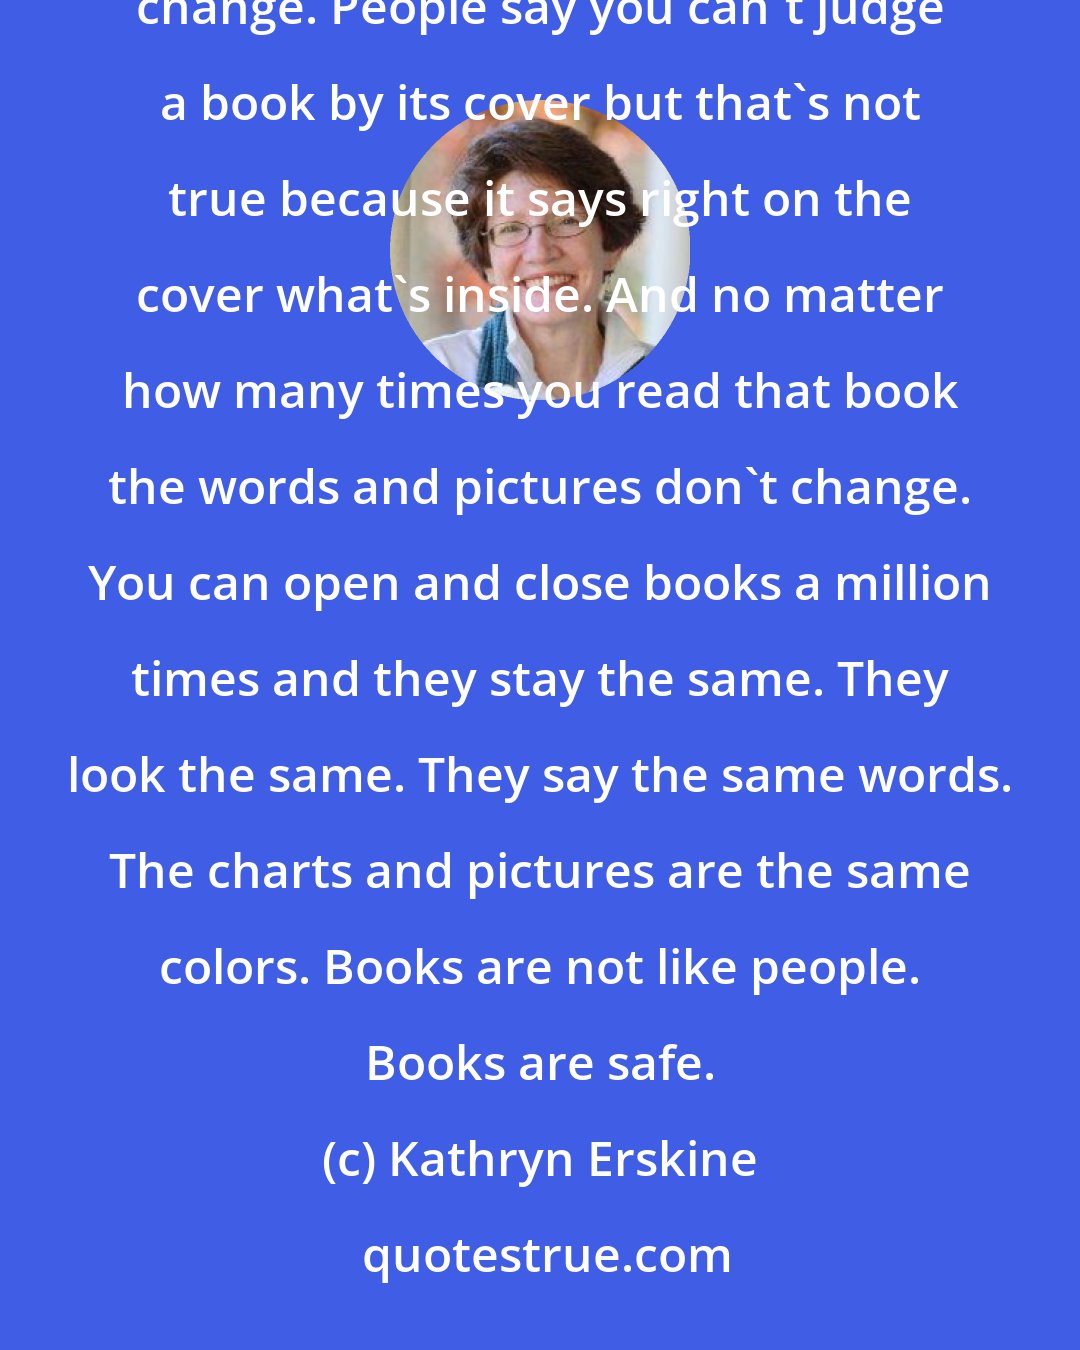 Kathryn Erskine: Sometimes I read the same books over and over and over. What's great about books is that the stuff inside doesn't change. People say you can't judge a book by its cover but that's not true because it says right on the cover what's inside. And no matter how many times you read that book the words and pictures don't change. You can open and close books a million times and they stay the same. They look the same. They say the same words. The charts and pictures are the same colors. Books are not like people. Books are safe.